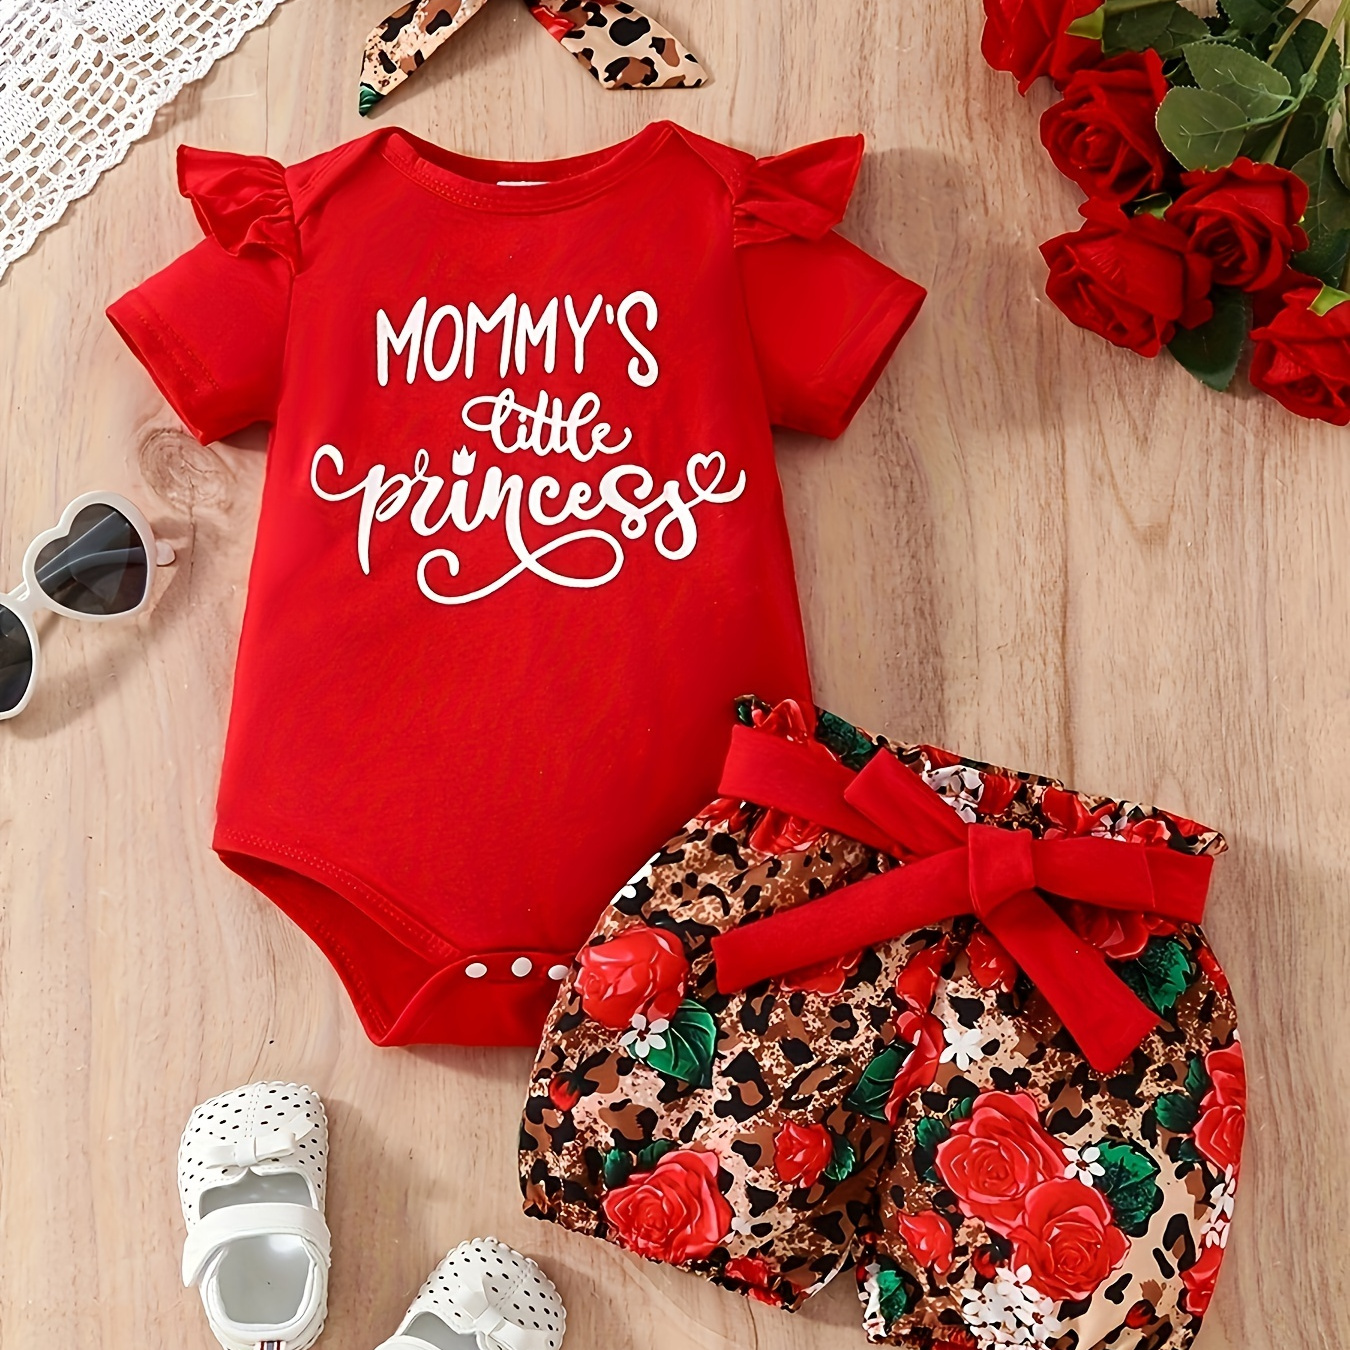 

Baby's "mommy's Little Princess" Print 2pcs Short Sleeve Outfit, Casual Onesie & Headband & Flower Leopard Pattern Shorts Set, Toddler & Infant Girl's Clothes For Daily/holiday, As Gift